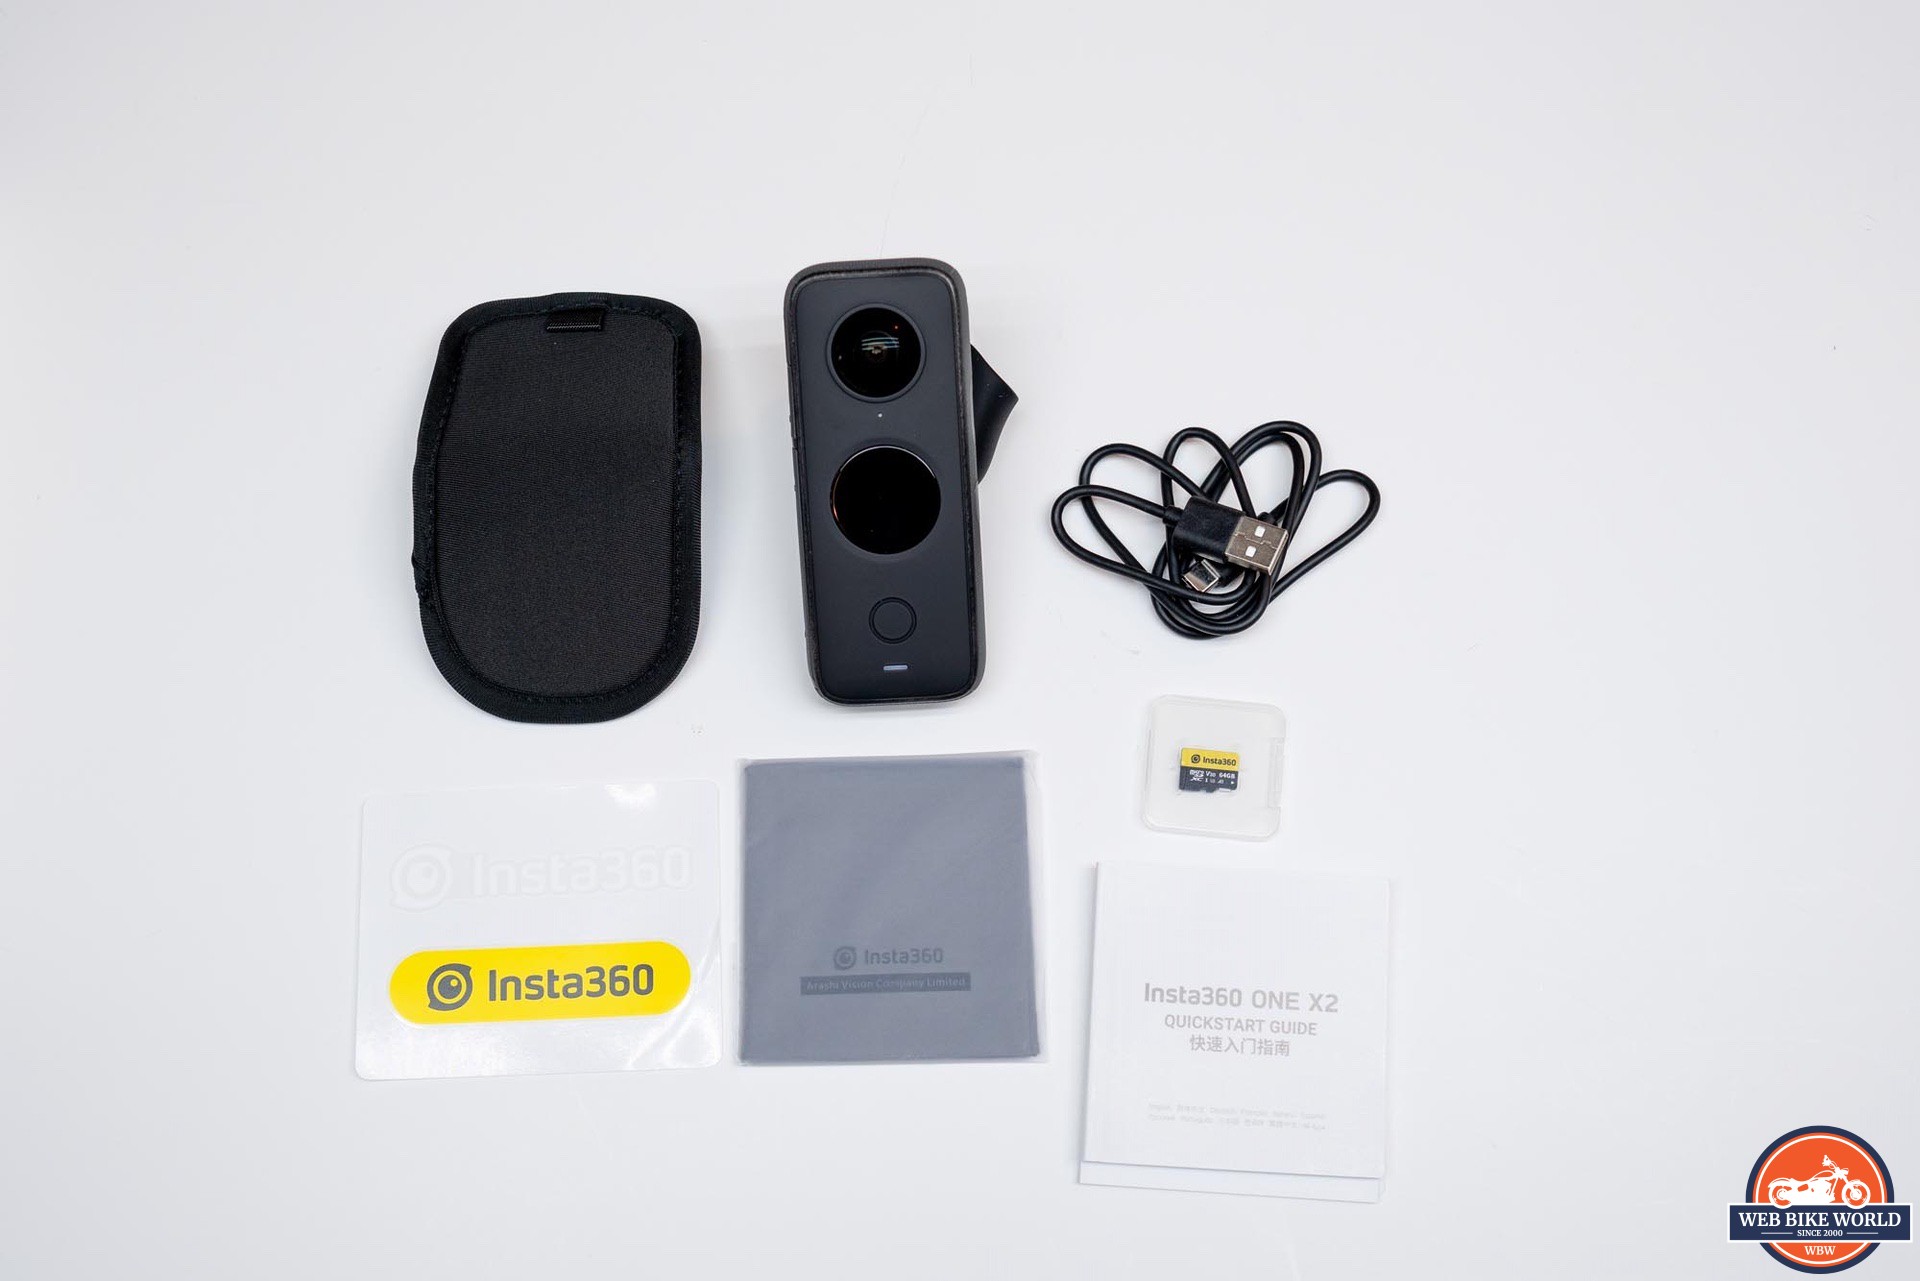 Contents of packaging for Insta360 One X2 Camera